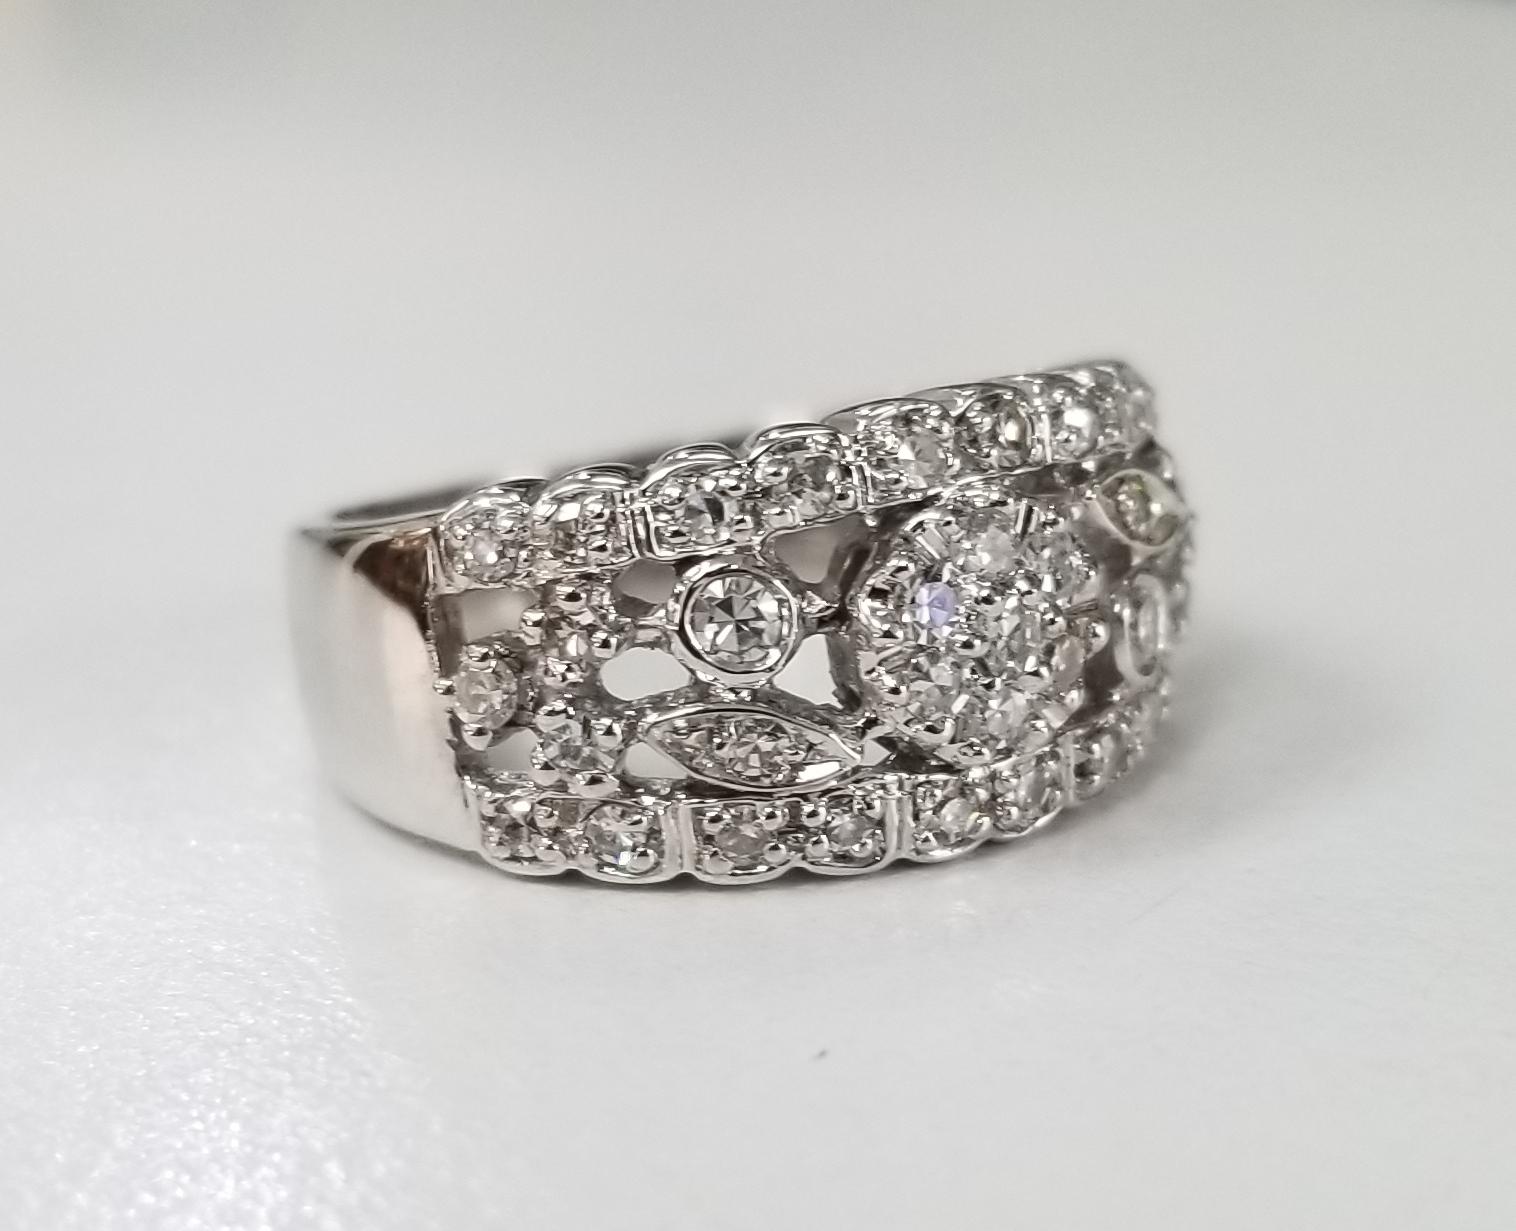 14 karat white gold diamond wedding ring, containing 37 round single cut diamonds of very fine quality weighing .65pts.  This ring is a size 7 but we will size to fit for free.